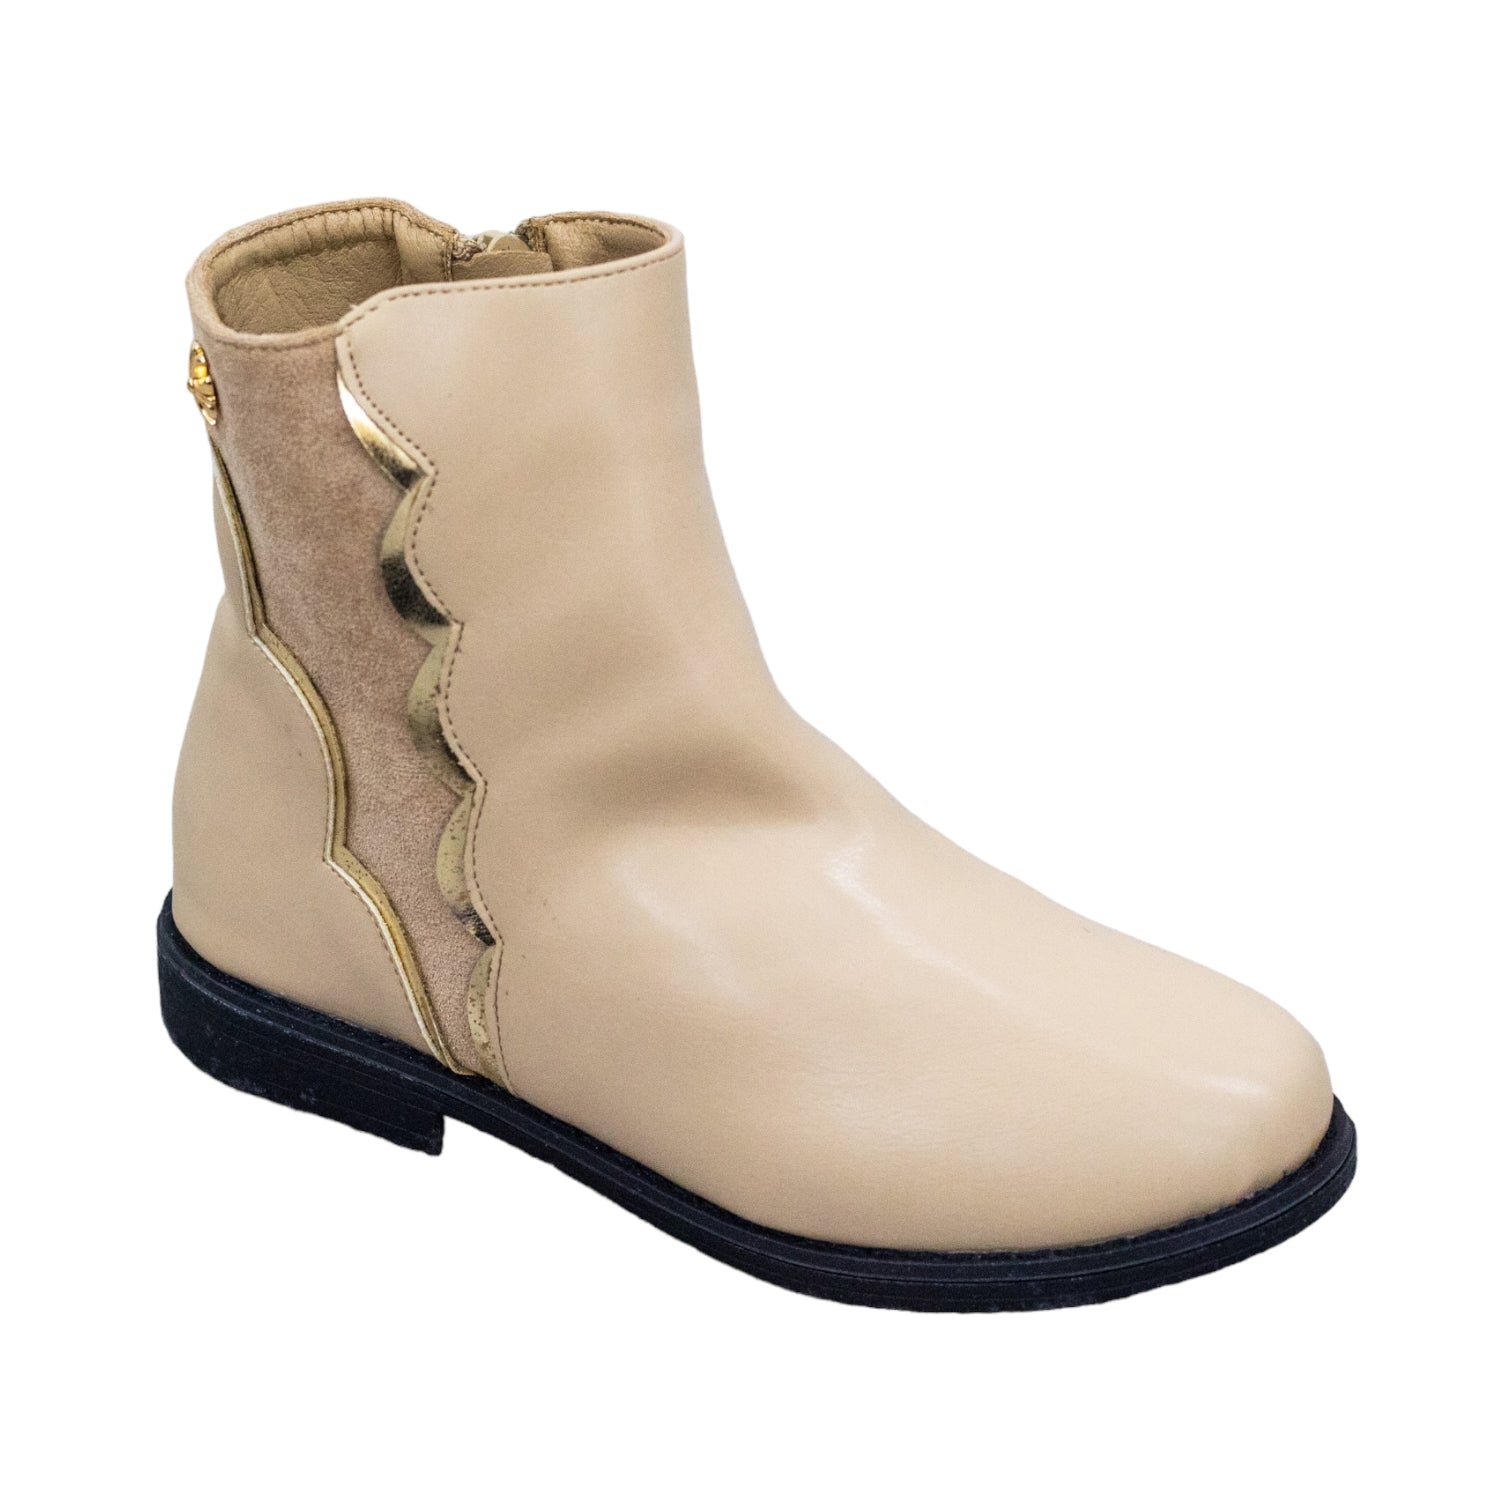 Beige girls ankle boot with side detailed yesenia